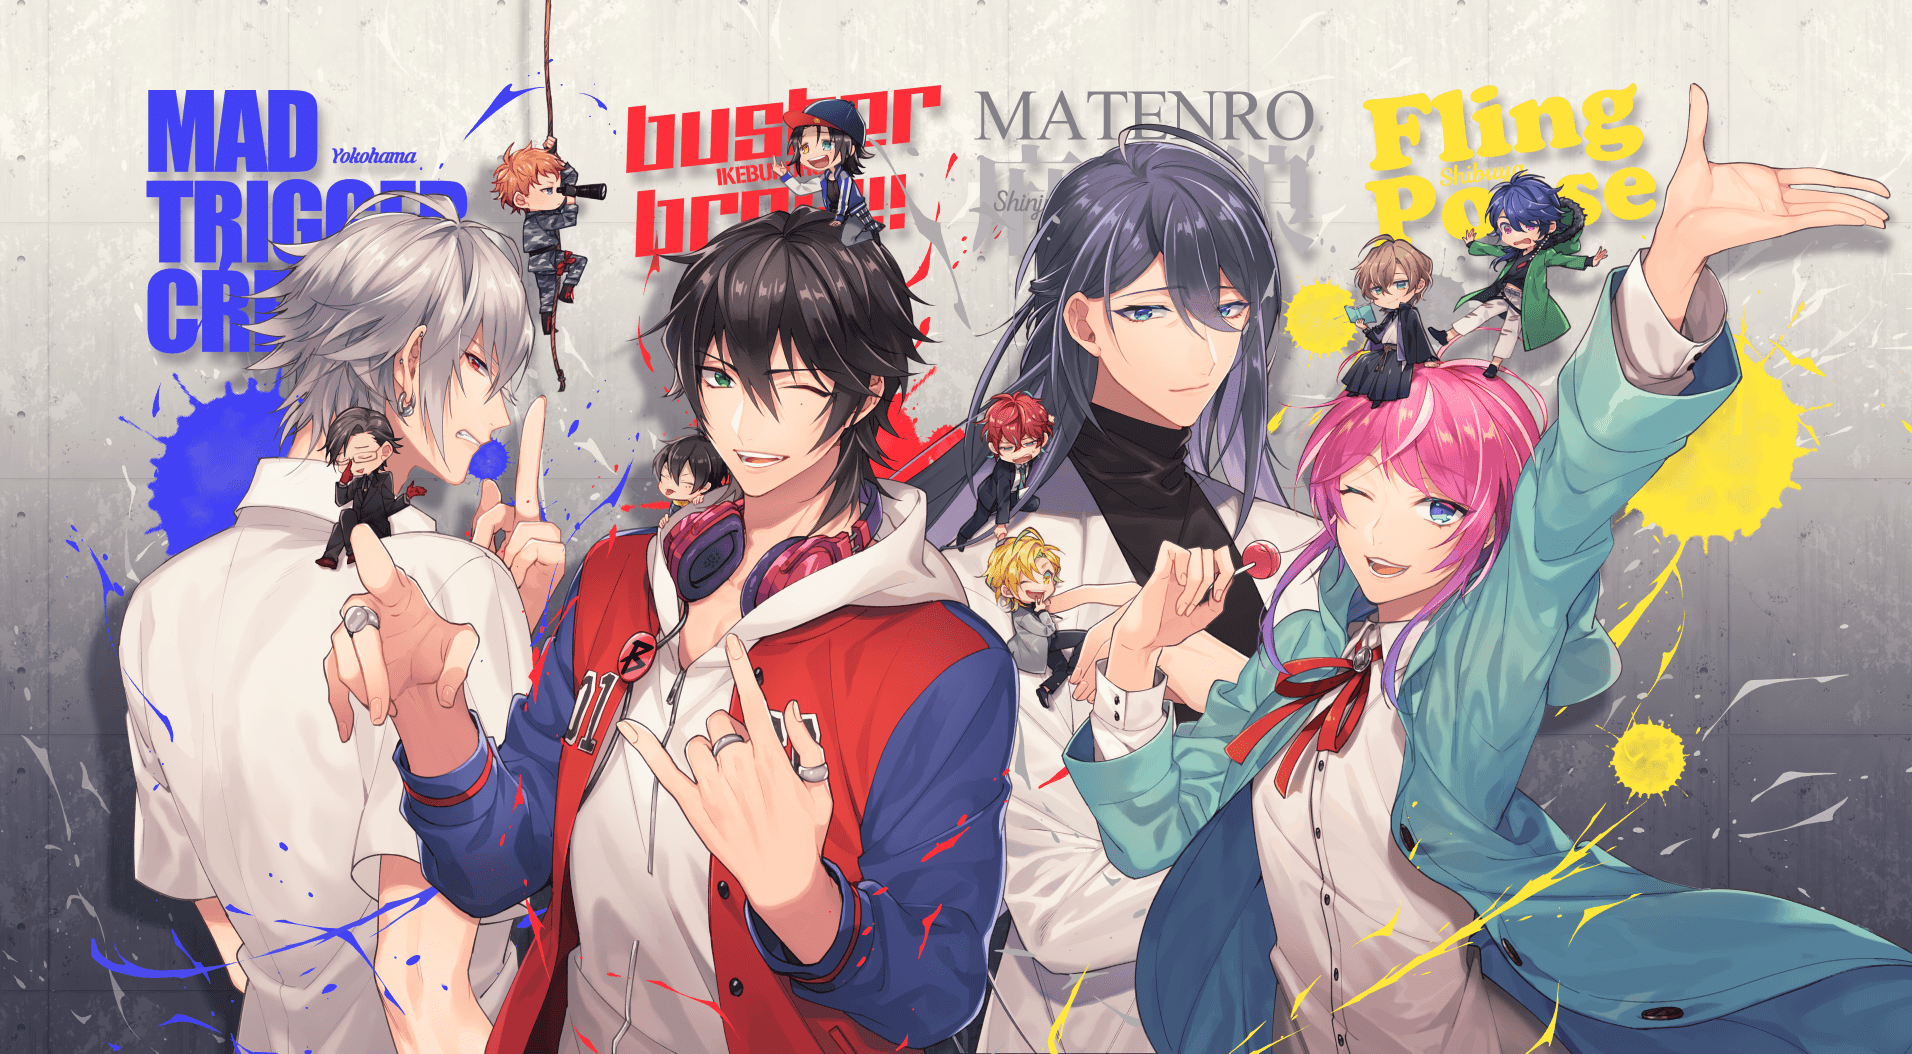 Hypnosis Mic Wallpapers